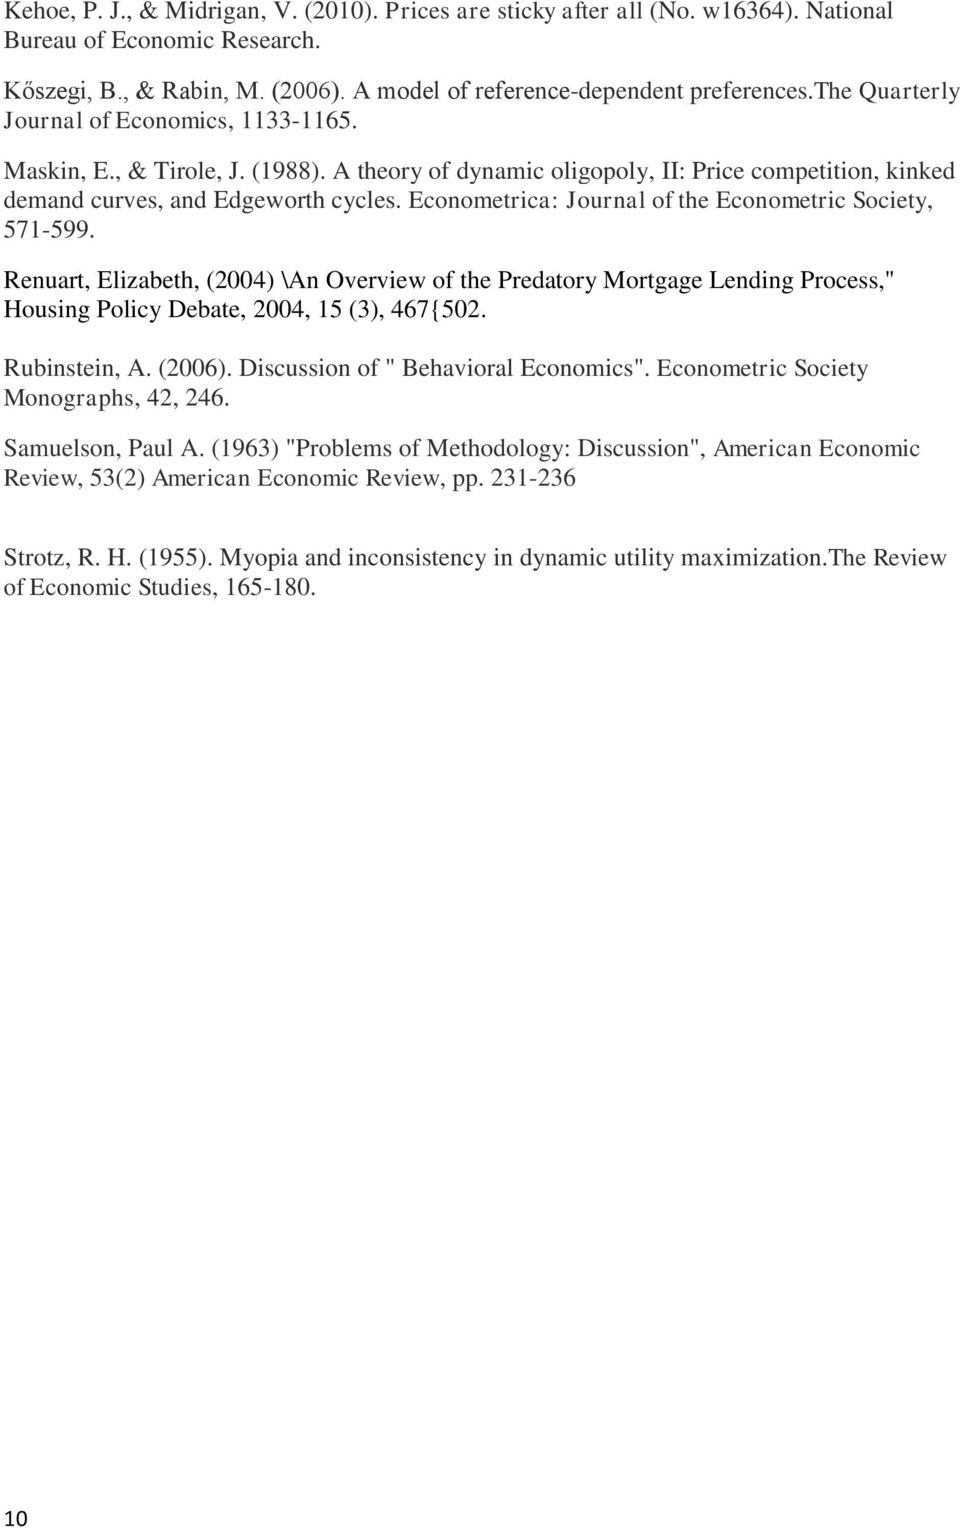 Econometrica: Journal of the Econometric Society, 571-599. Renuart, Elizabeth, (2004) \An Overview of the Predatory Mortgage Lending Process," Housing Policy Debate, 2004, 15 (3), 467{502.